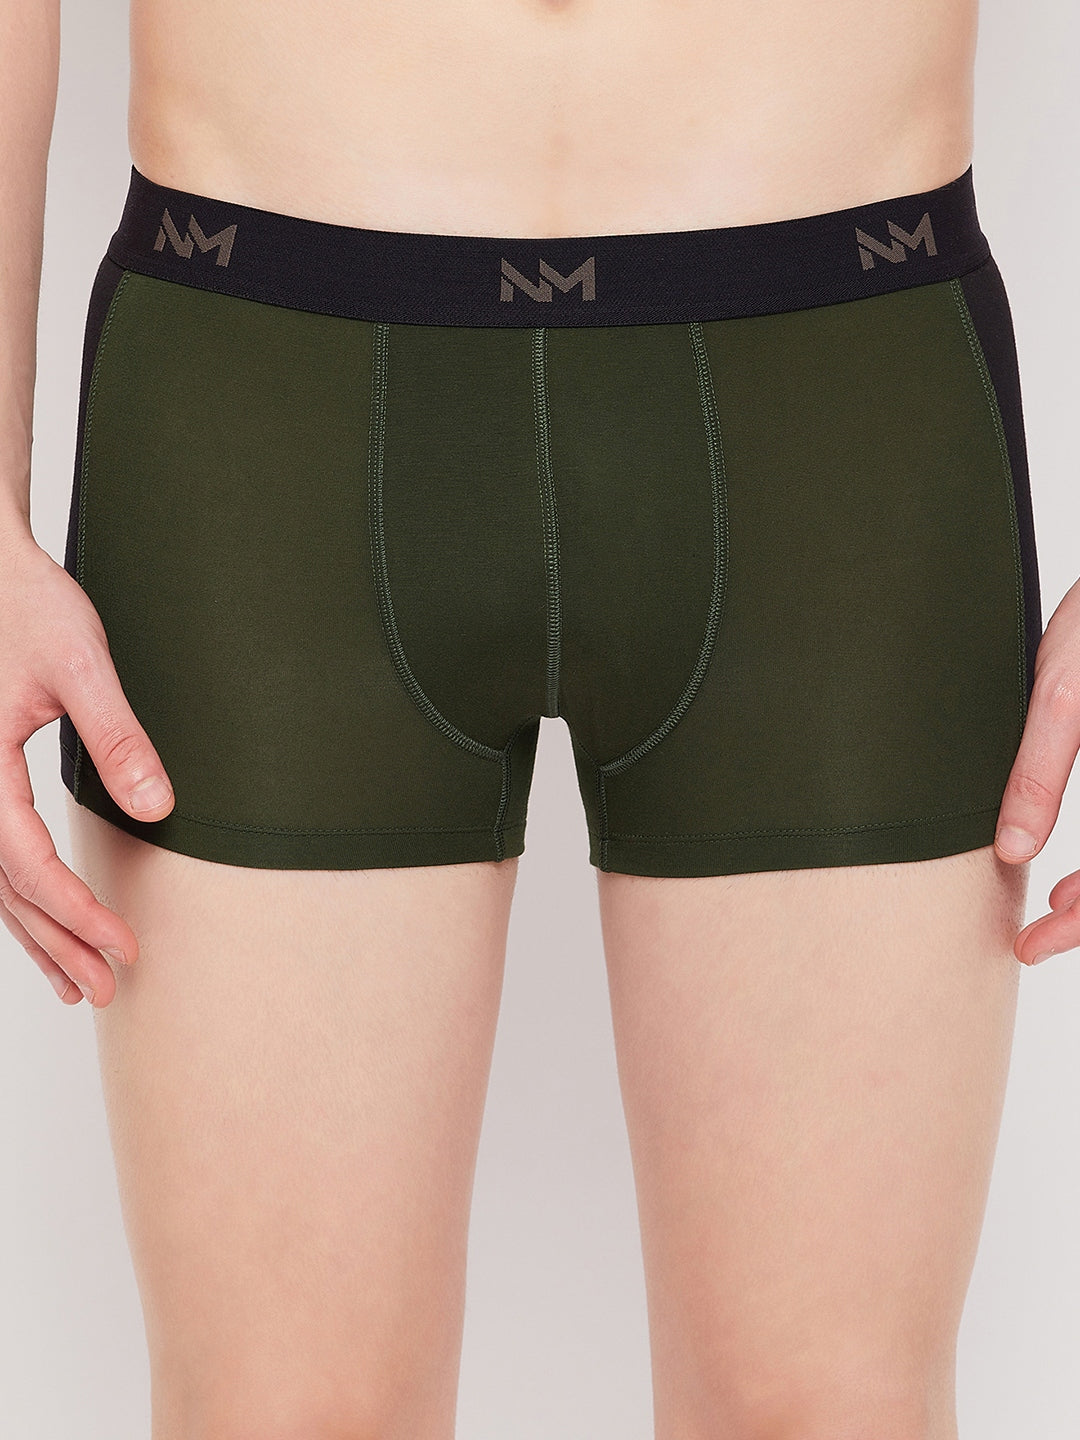 Neva Modal Solid Short Trunk Underwear for Men- Olive, Sea Green, Silver Grey Collection (Pack of 3)